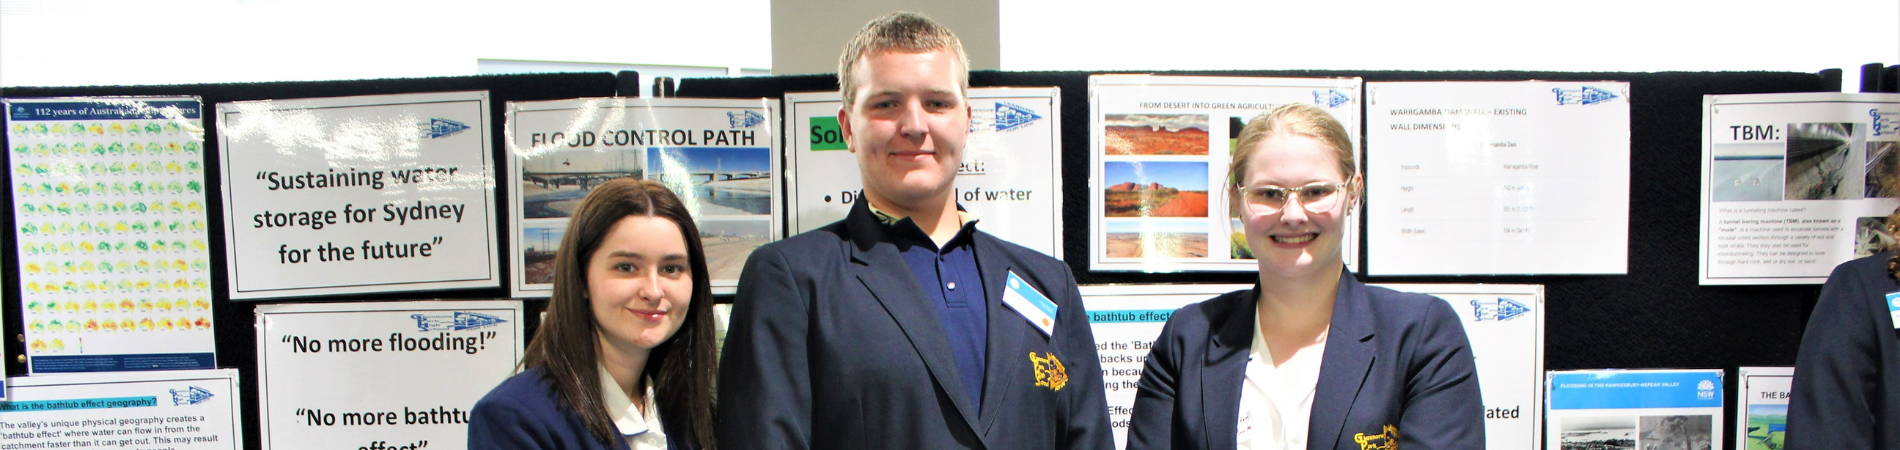 STEM2: Students from Glenmore Park High School with their flood mitigation models created as part of the STEM CPP.